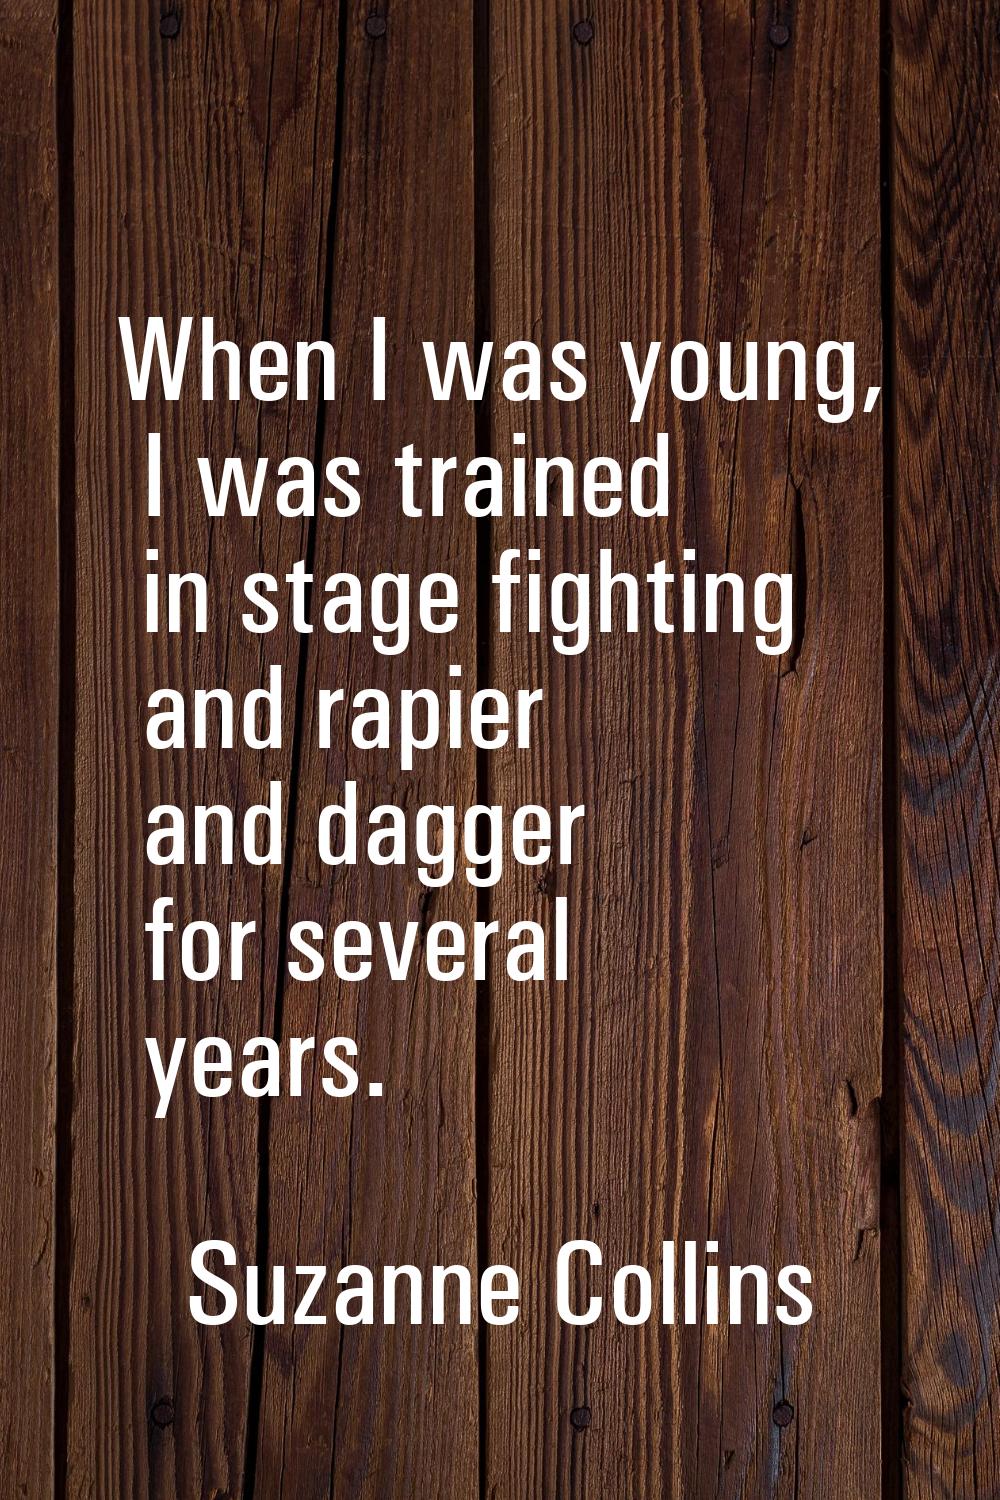 When I was young, I was trained in stage fighting and rapier and dagger for several years.